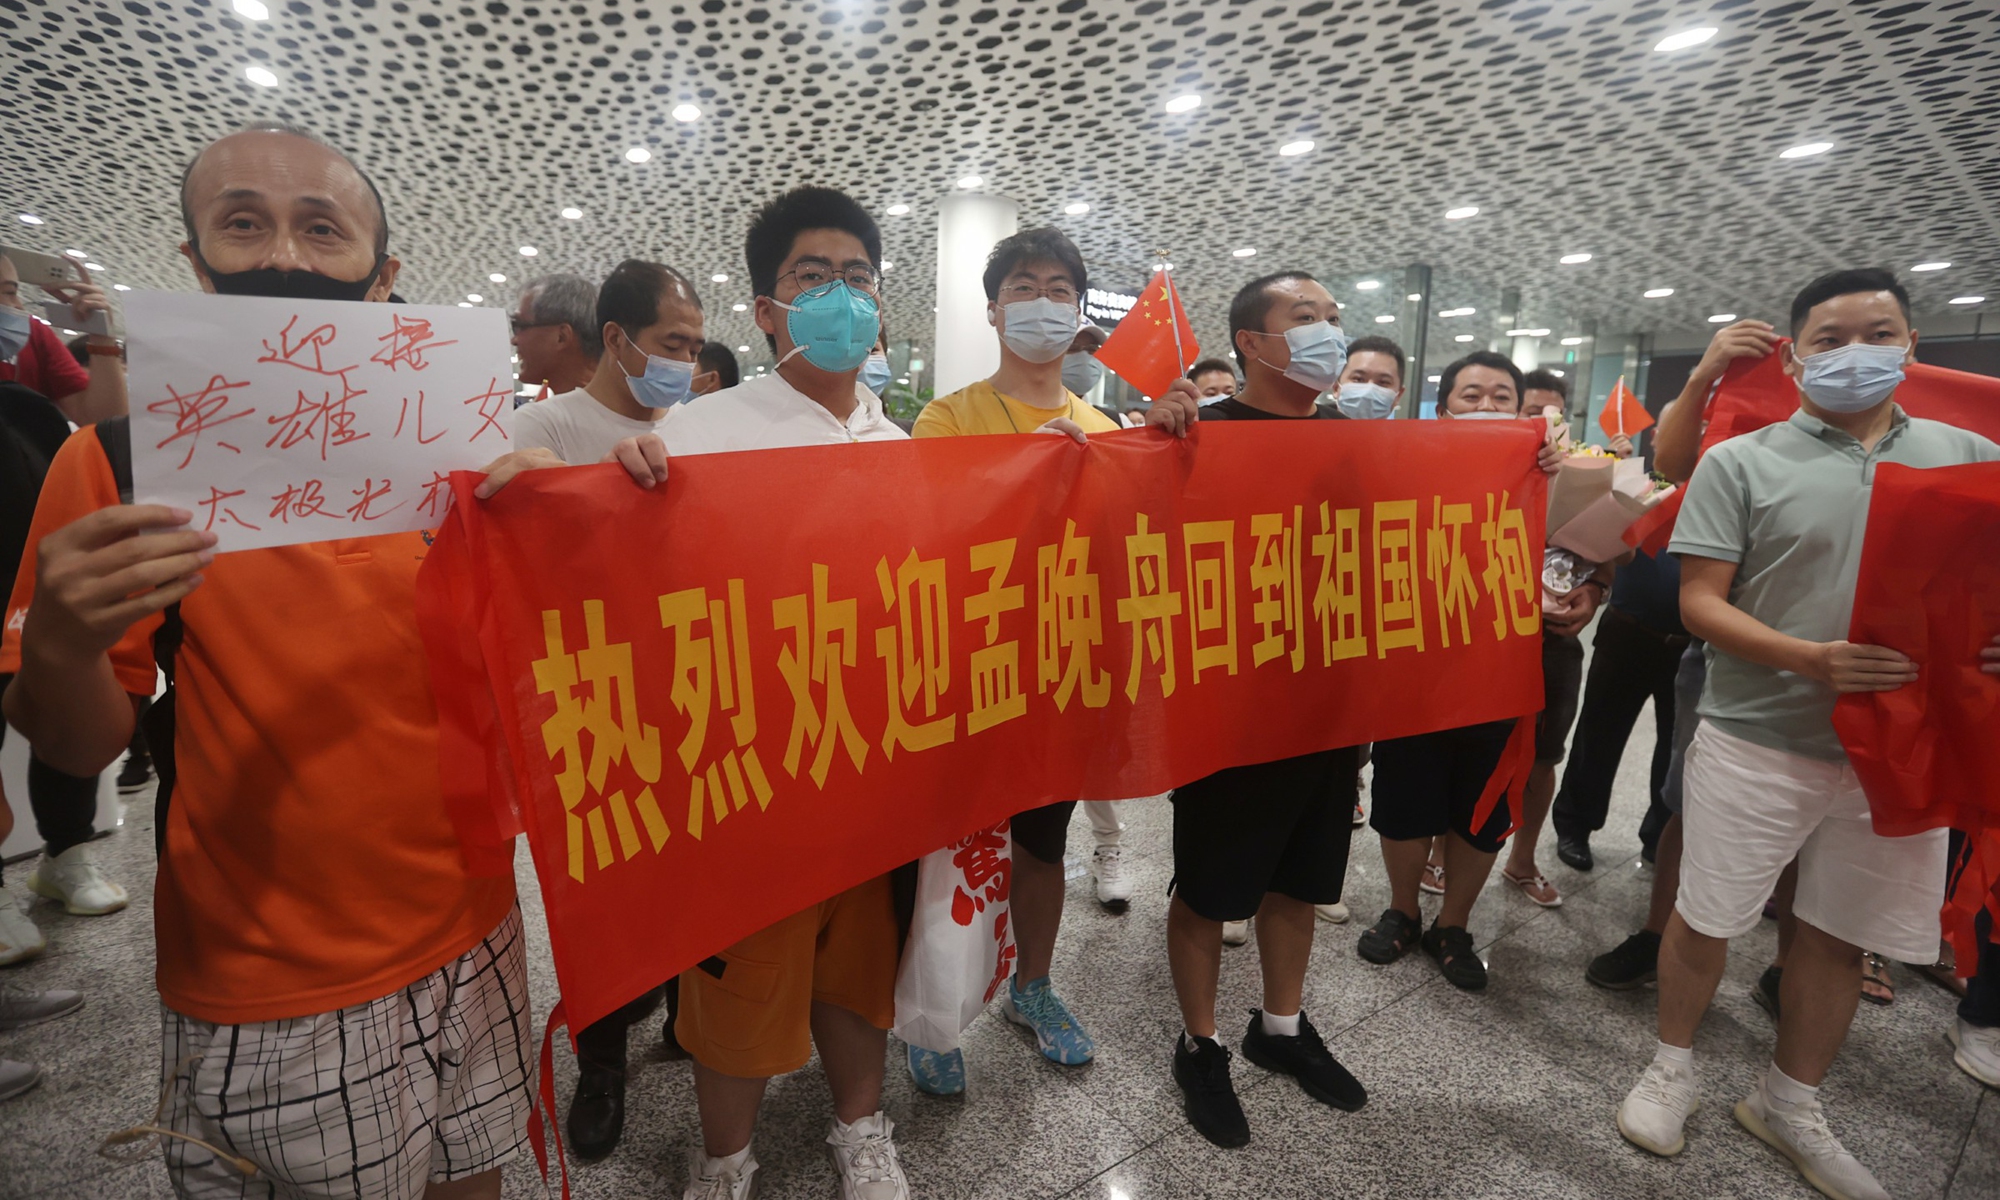 People welcome Meng Wanzhou home at Shenzhen airport Photo:Cui Meng/GT